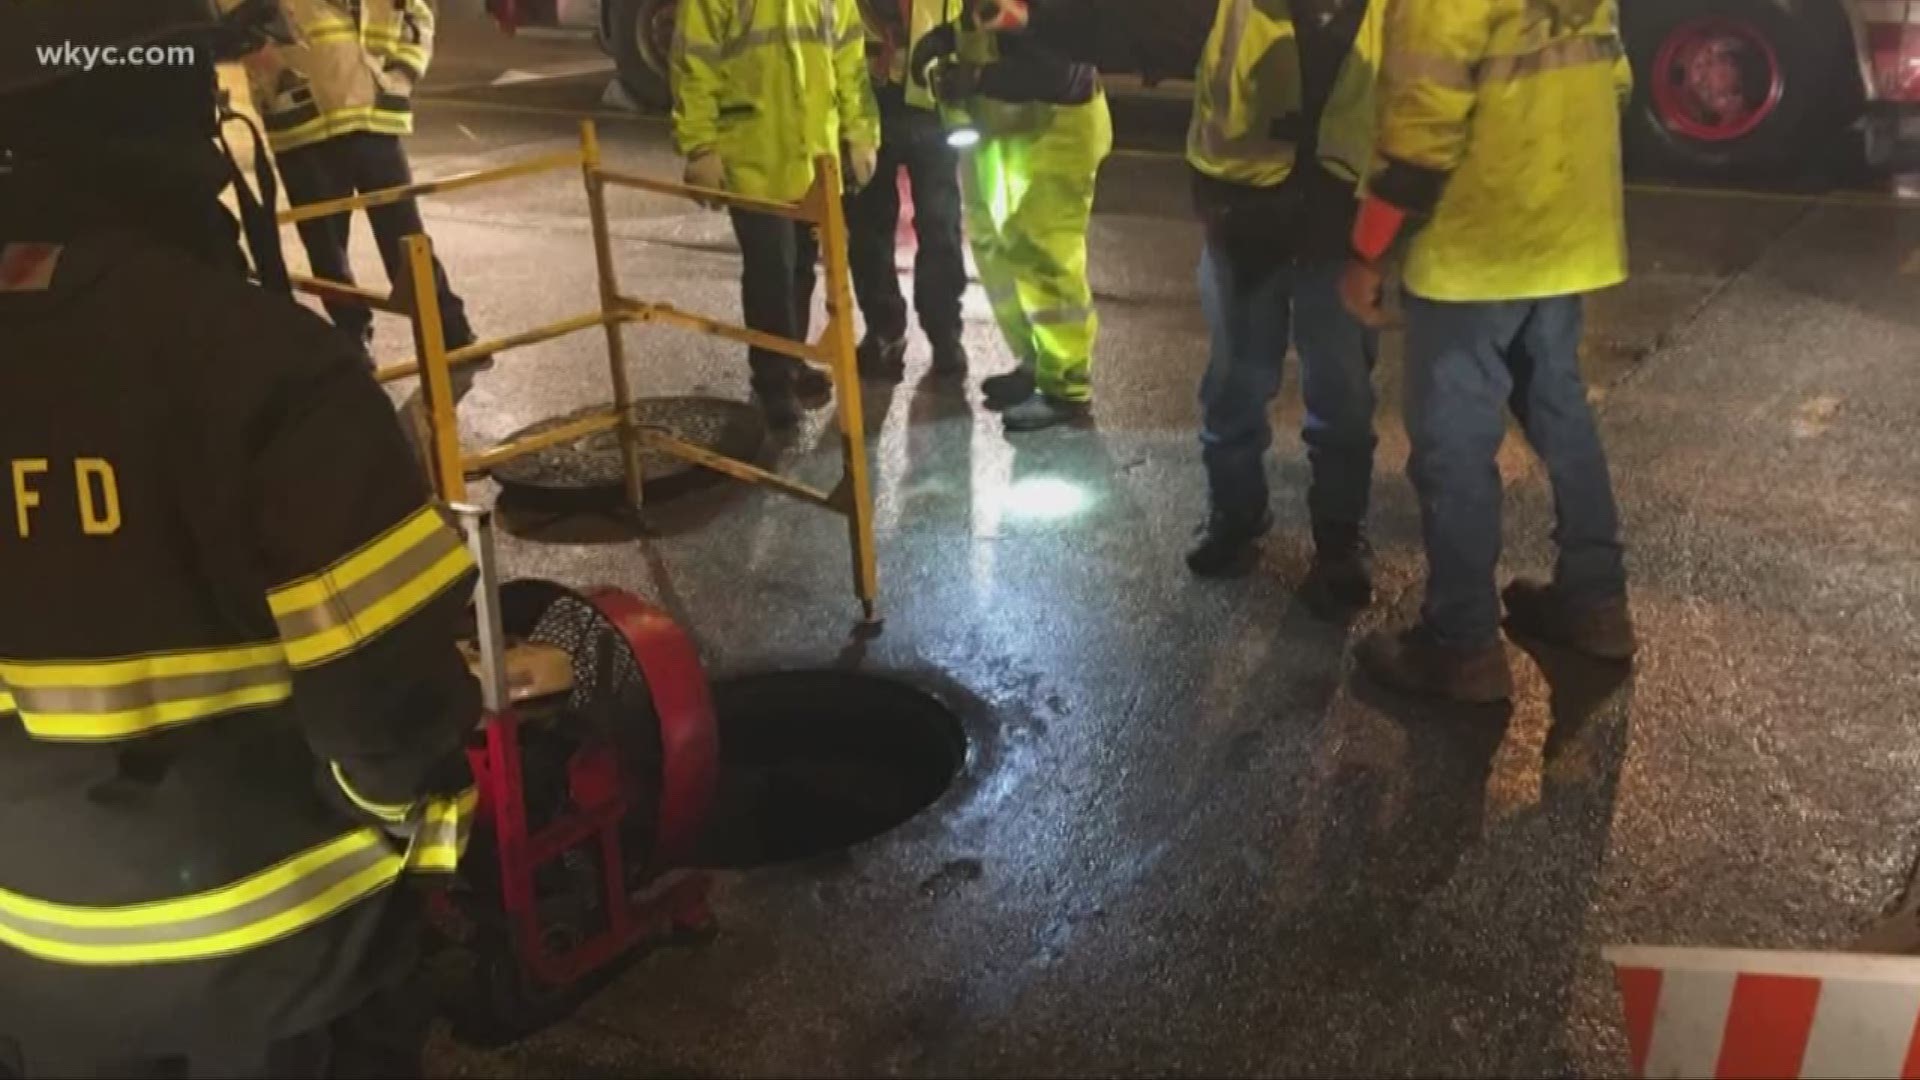 What started fires that blew off manhole covers in Cleveland